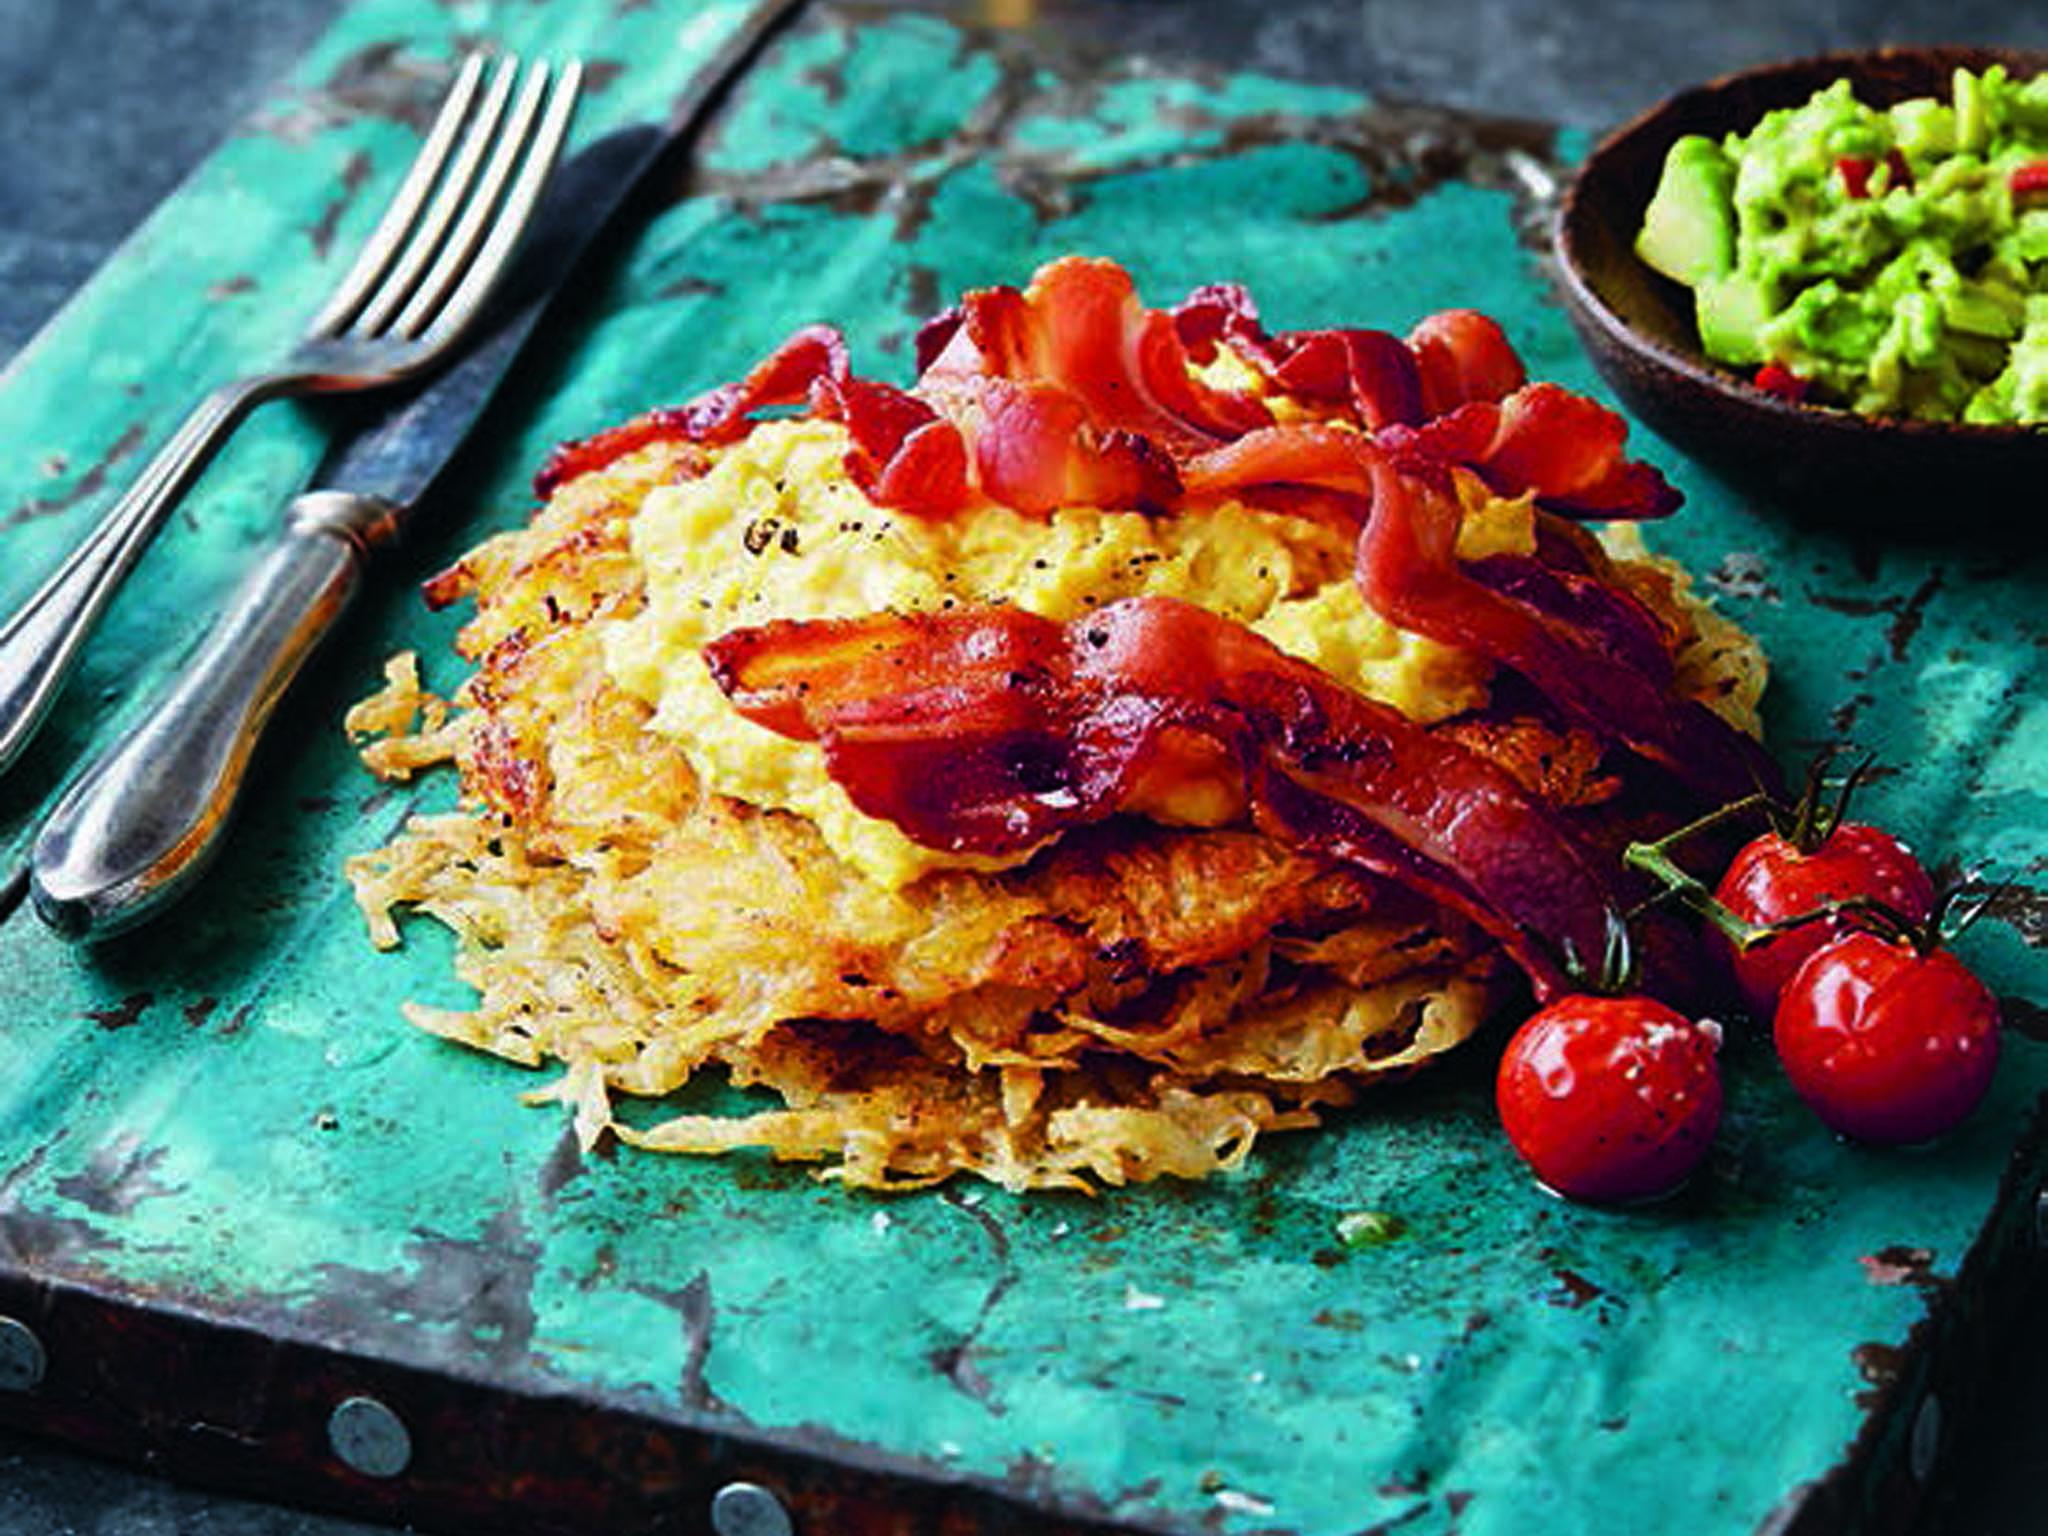 Streaky bacon and hashbrowns